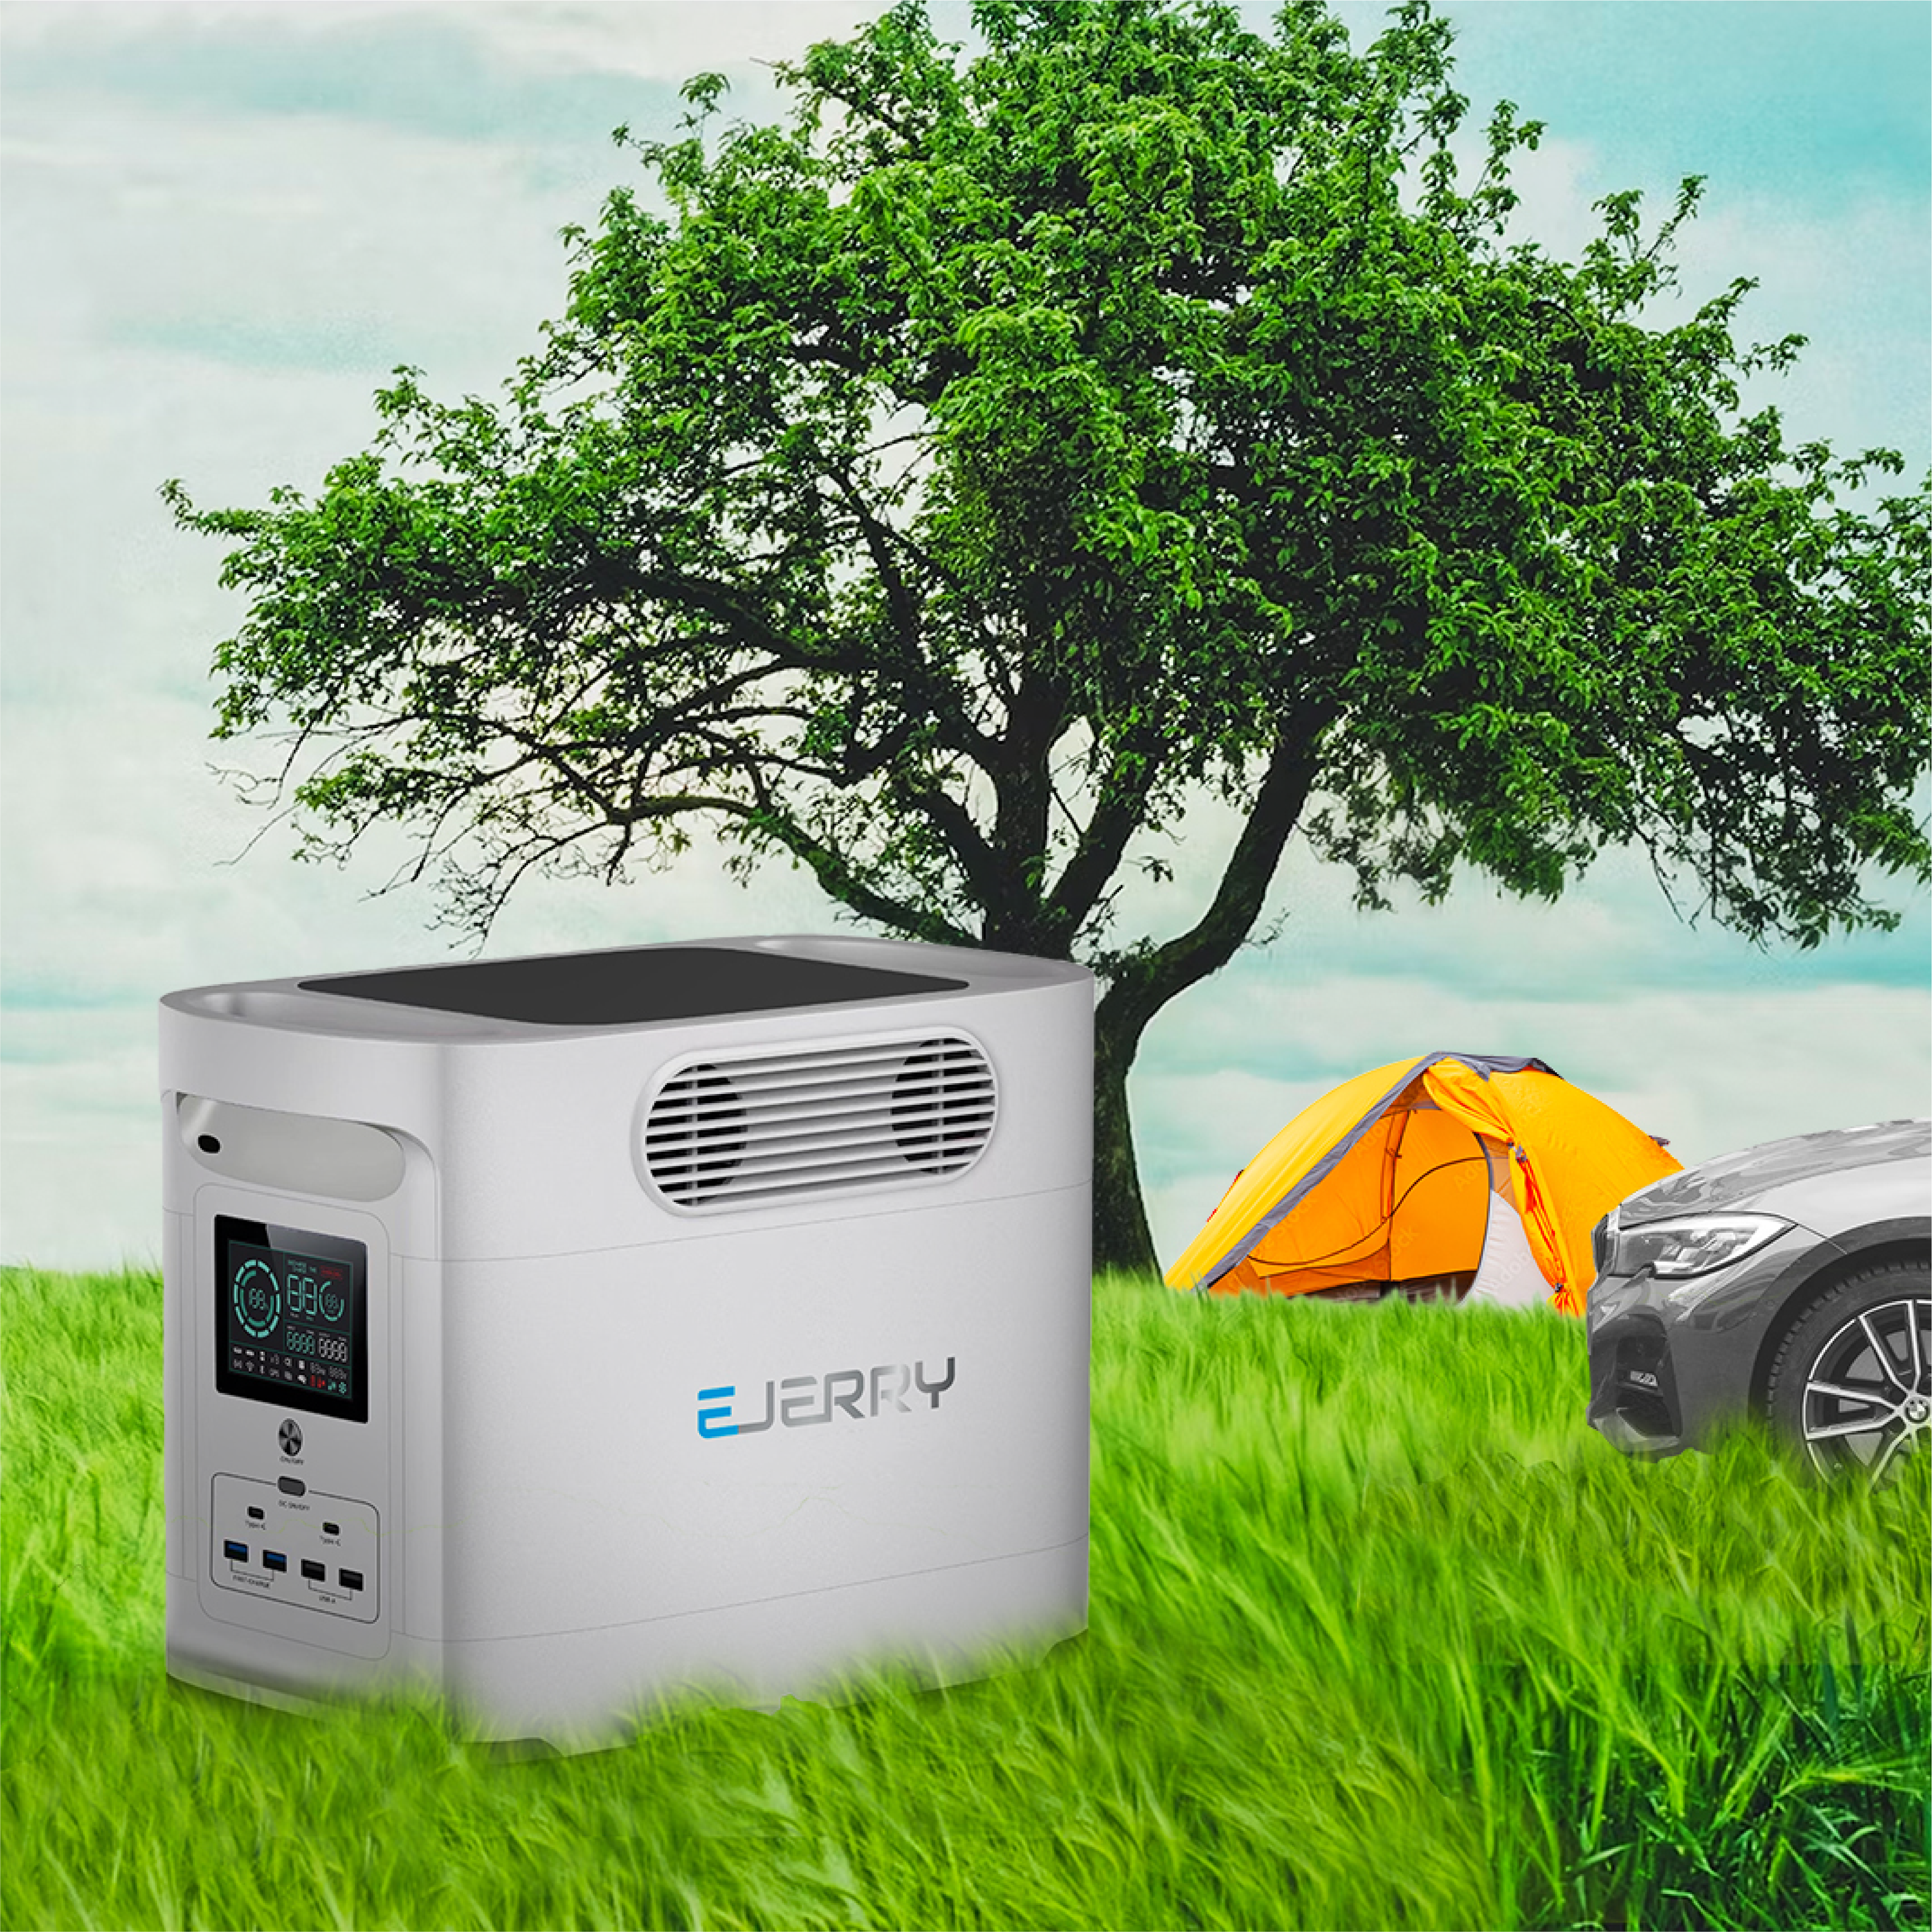 Mockup Render of Camping Trip with EJERRY EV Charger